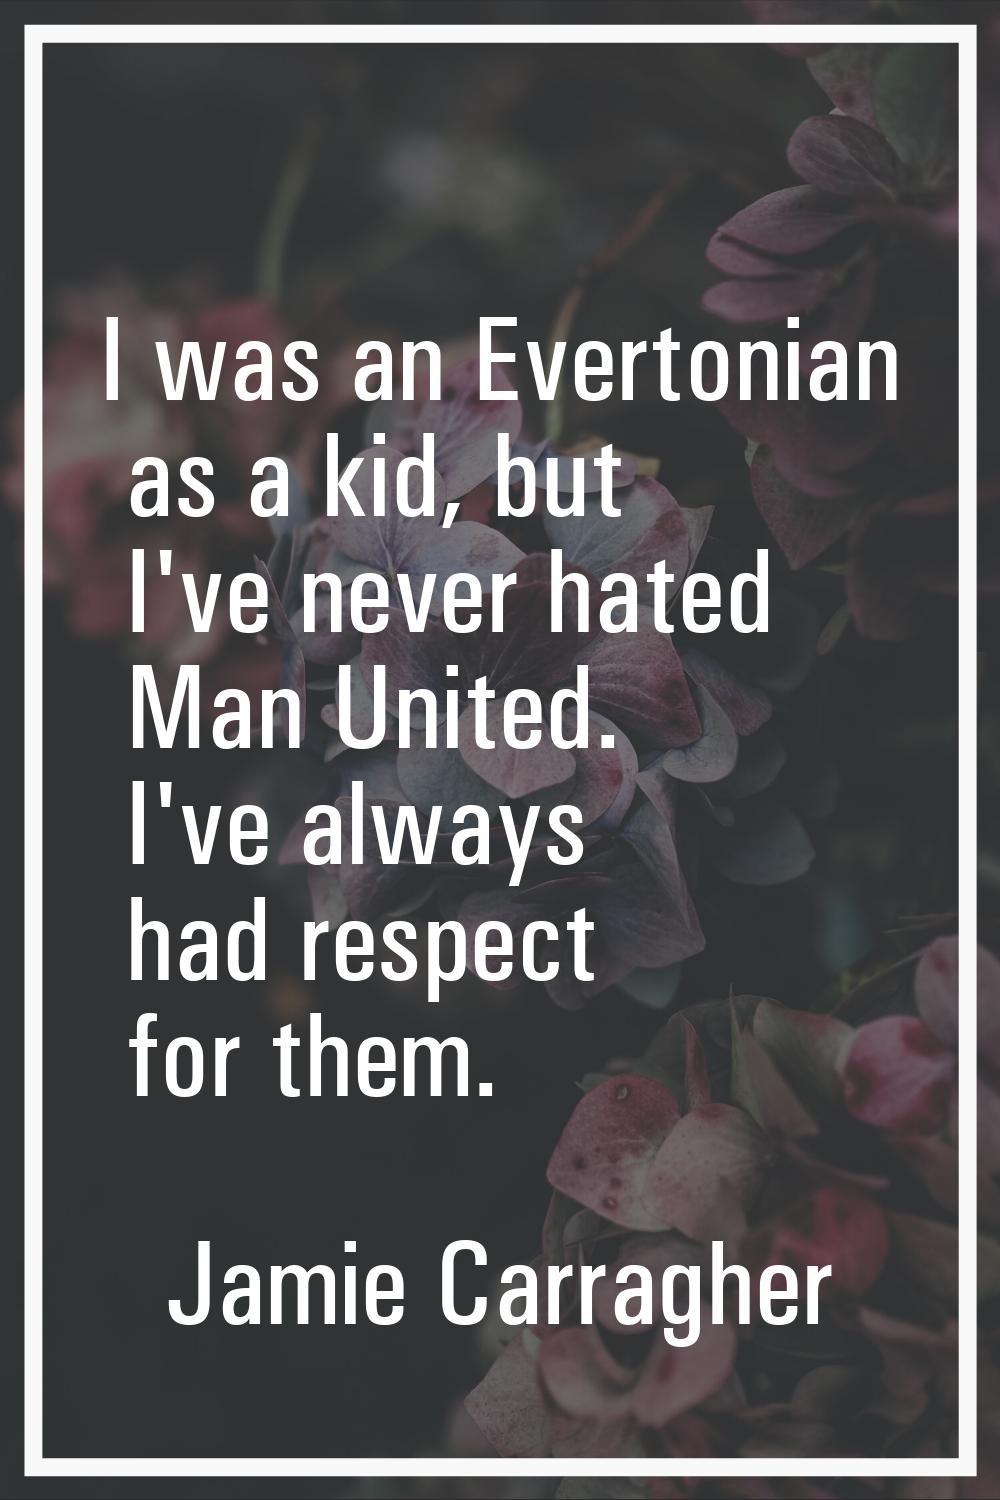 I was an Evertonian as a kid, but I've never hated Man United. I've always had respect for them.